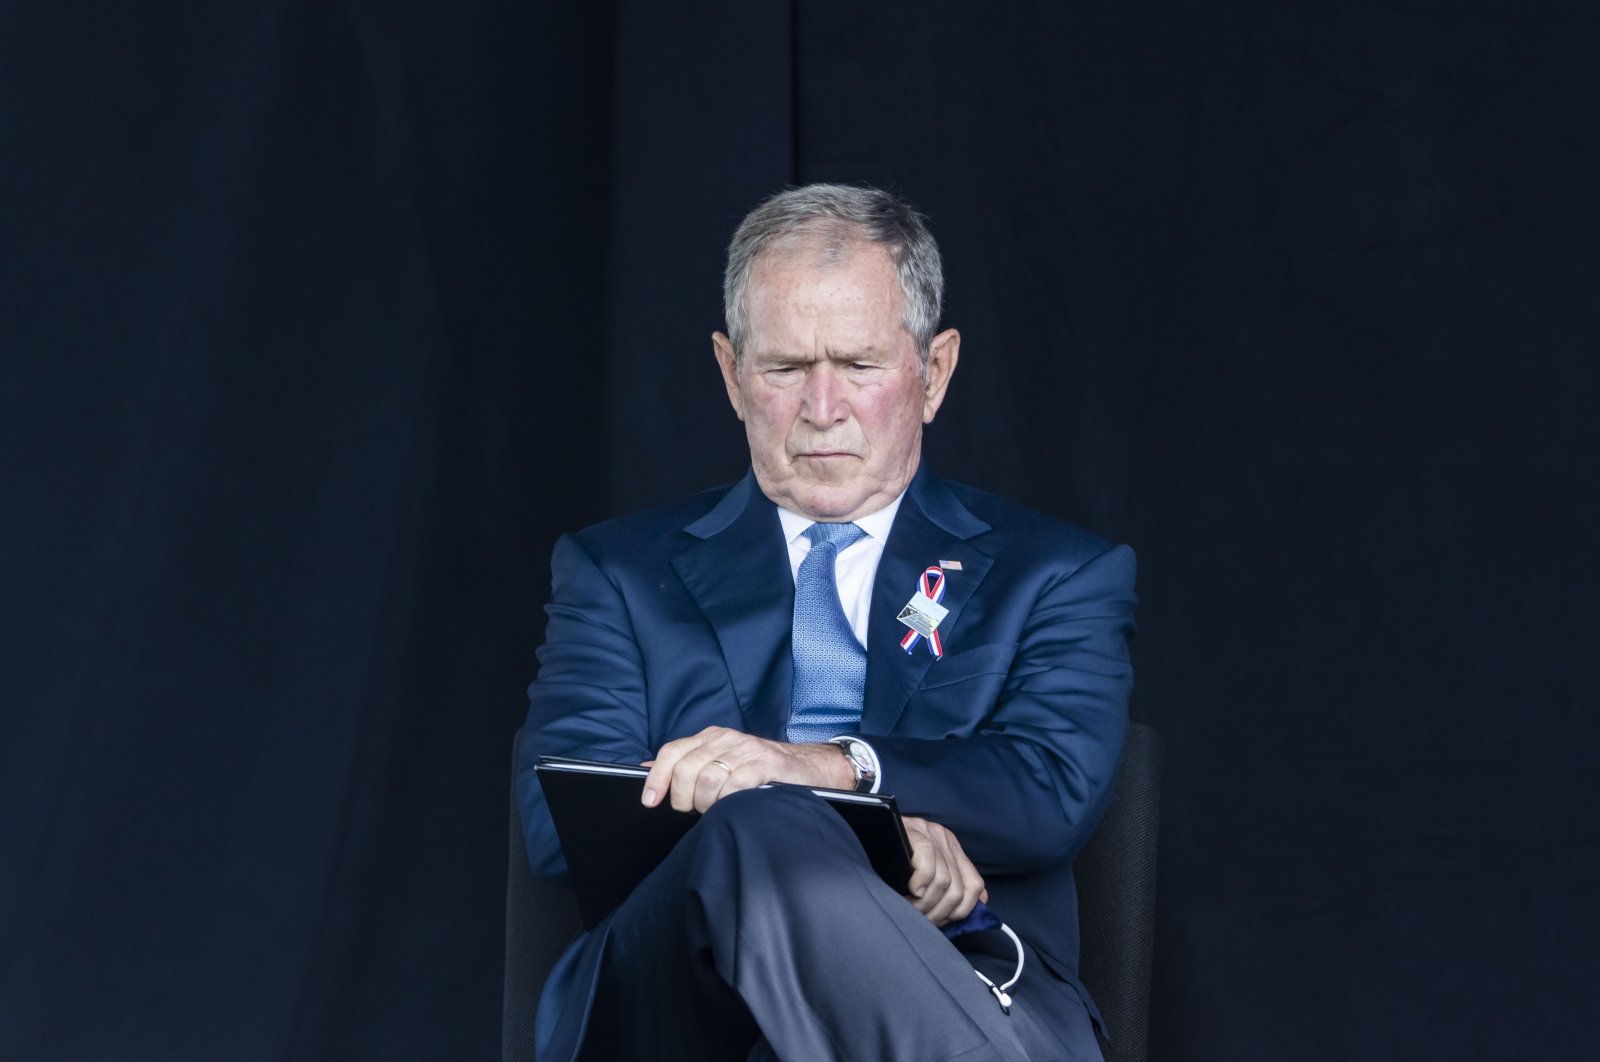 On the 20th anniversary of 9/11, former U.S. President George Bush waits to speak at the Flight 93 National Memorial in Shanksville, Pennsylvania,  Sept. 11, 2021. (EPA File Photo)